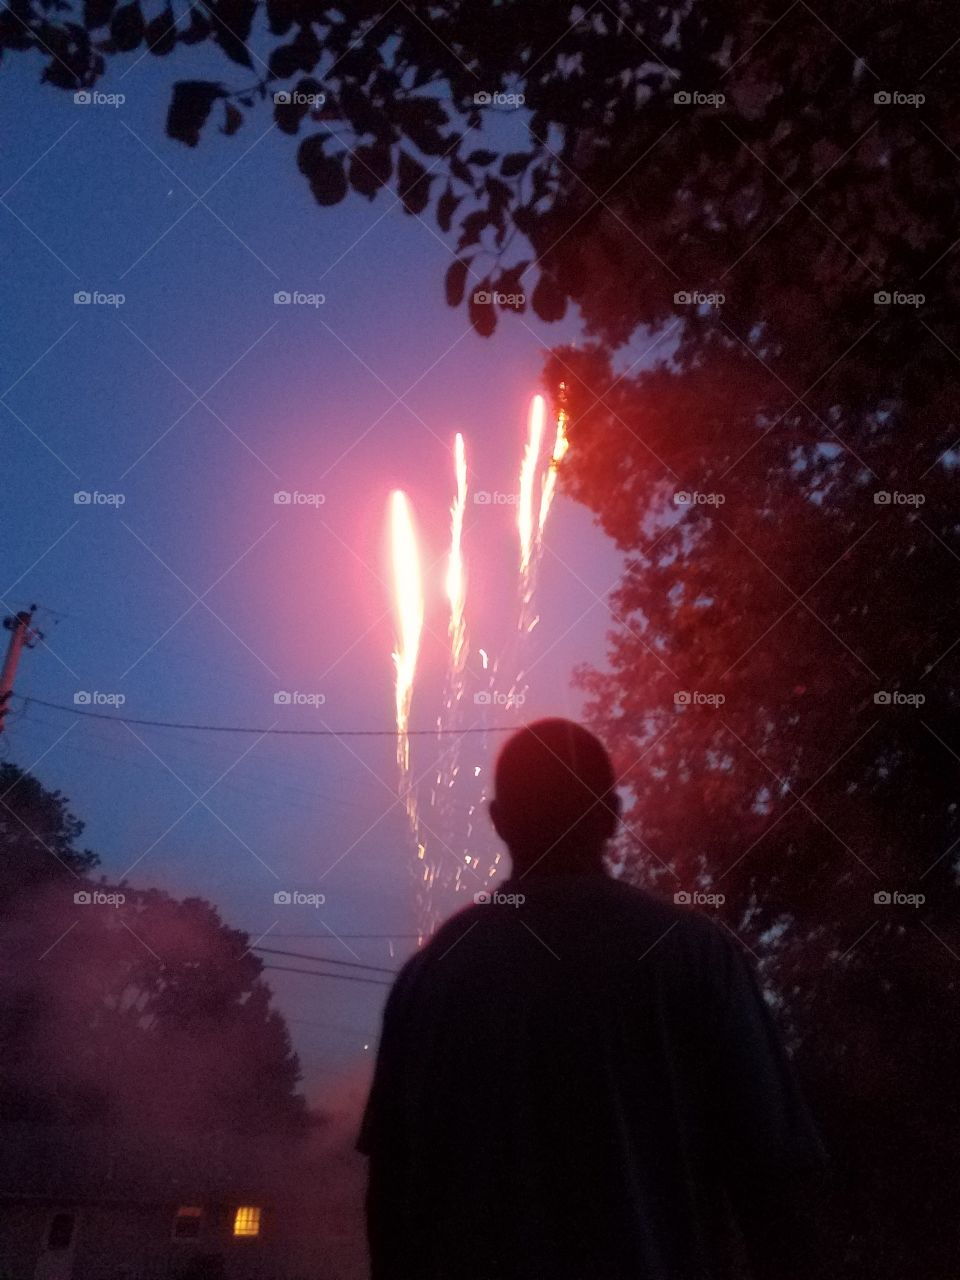 4th of July red firework photo with silhouette